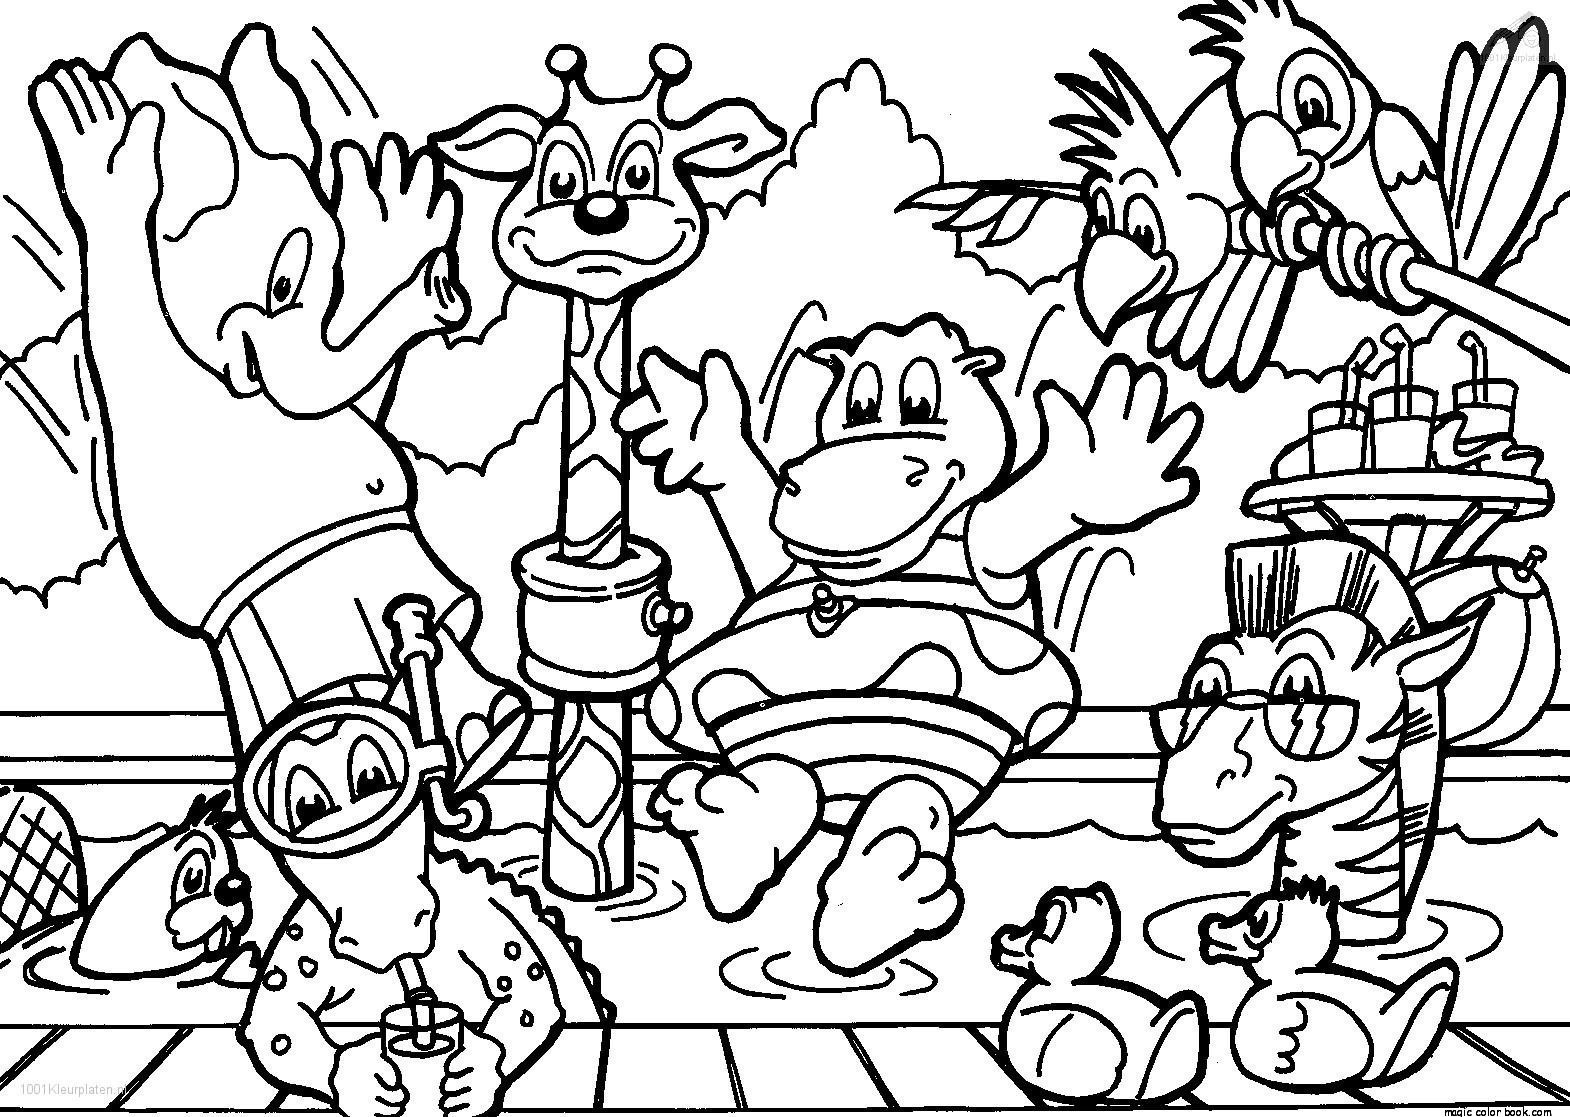 Featured image of post Zoo Coloring Pages Pdf / After you finish the coloring sheets share them with us on facebook and twitter!